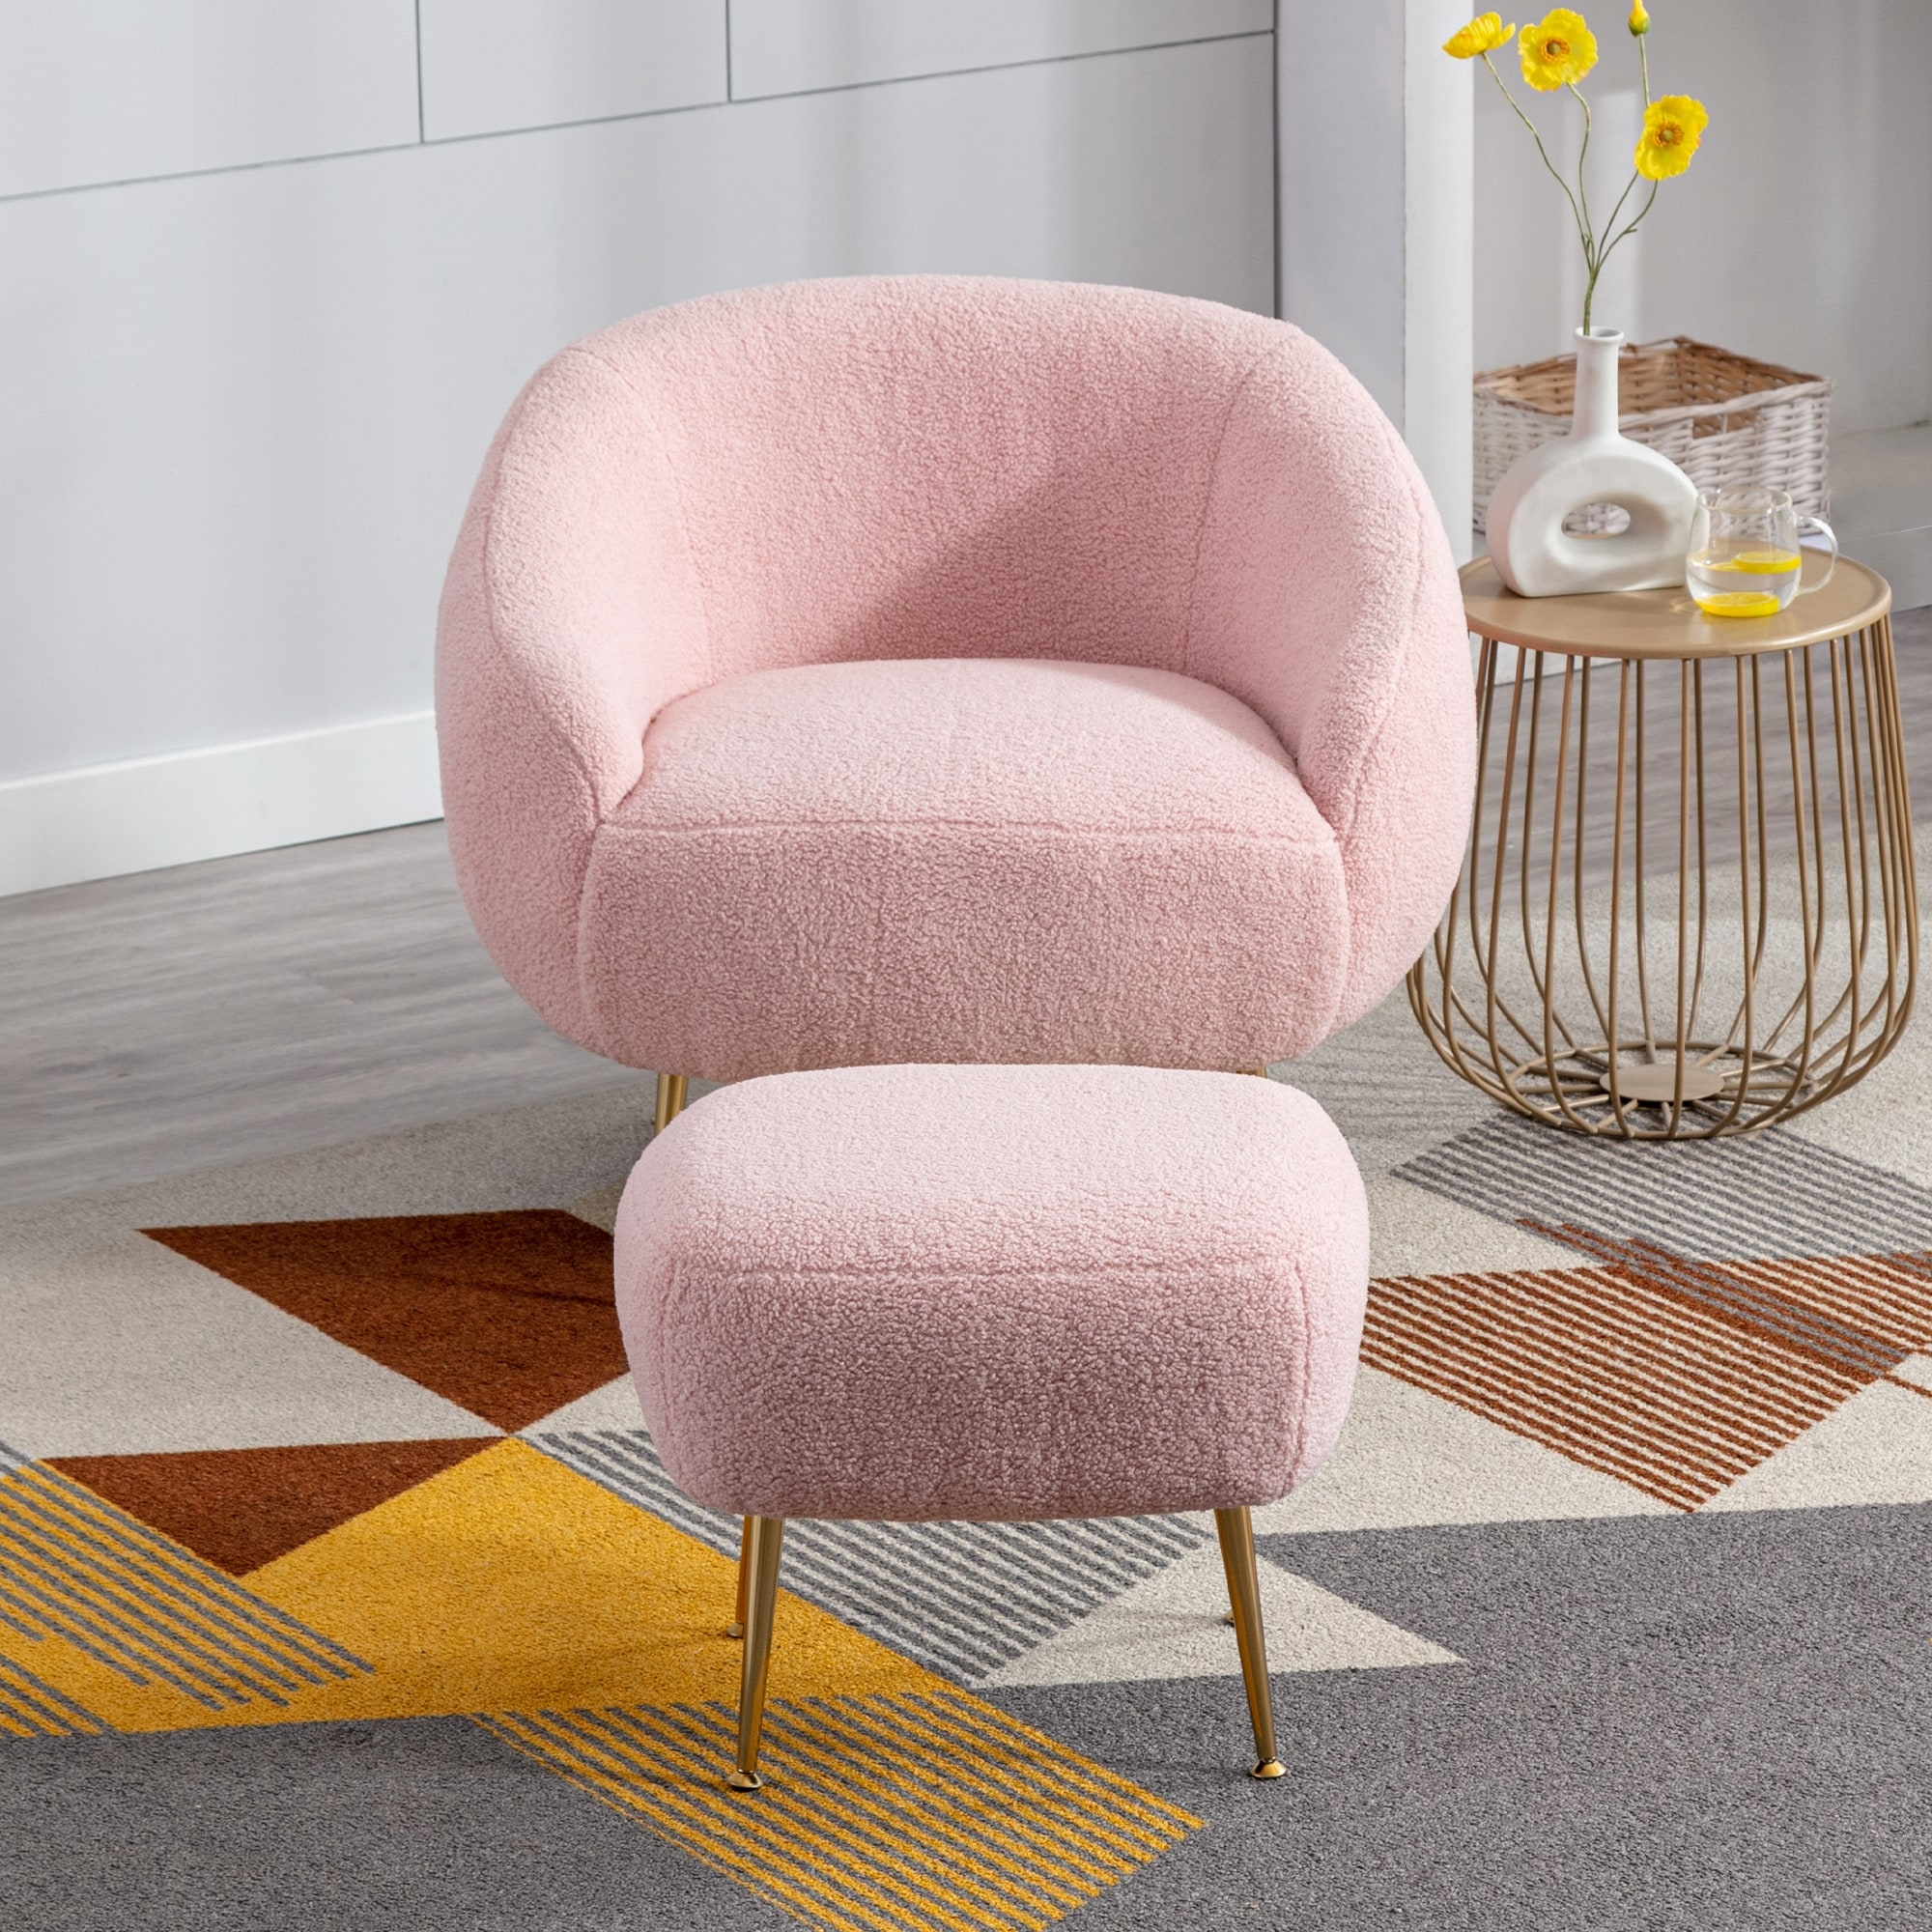 https://ak1.ostkcdn.com/images/products/is/images/direct/7999f2fb86bef277f74392f7682a2948b0b6c086/Modern-Comfy-Leisure-Accent-Chair%2C-Teddy-Short-Plush-Particle-Velvet-Armchair-Living-Room-Chair-%26-Ottoman-Sets-with-Metal-Leg.jpg